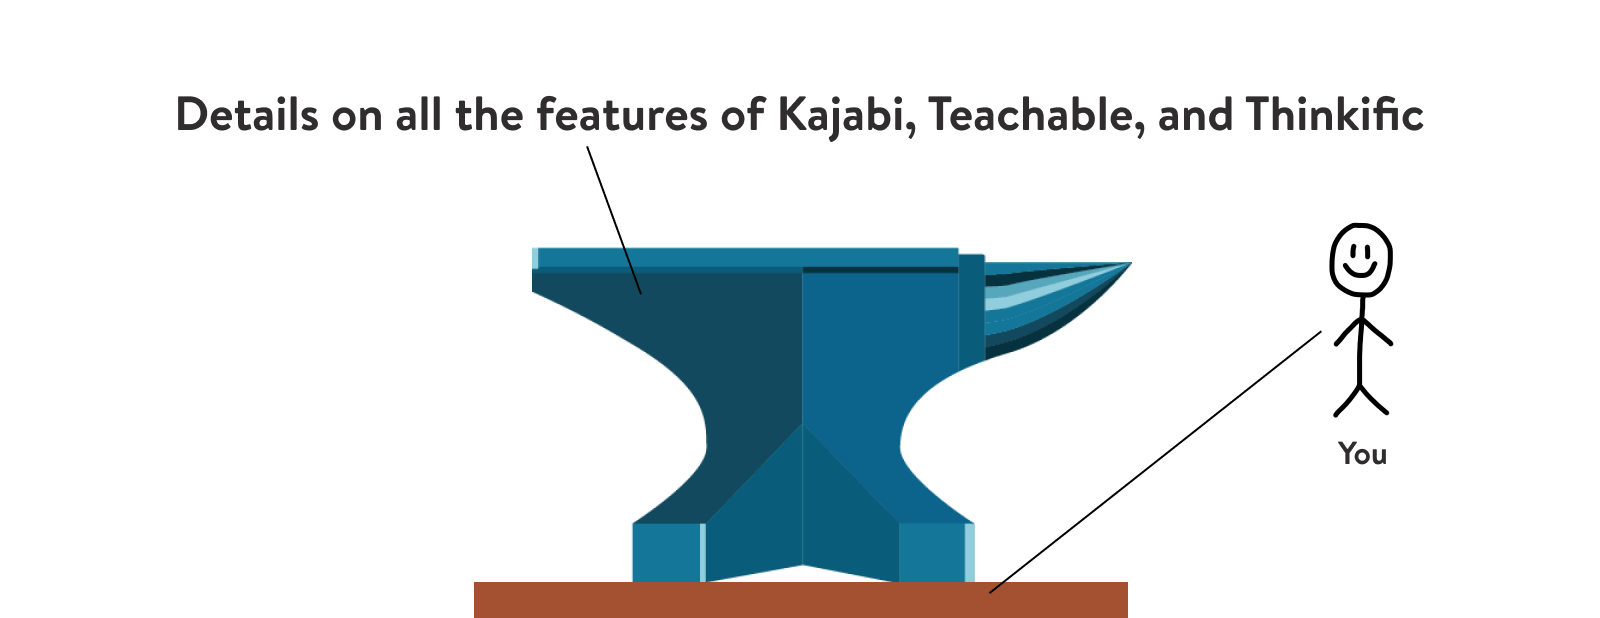 Details on all the features of Kajabi, Teachable, and Thinkific 